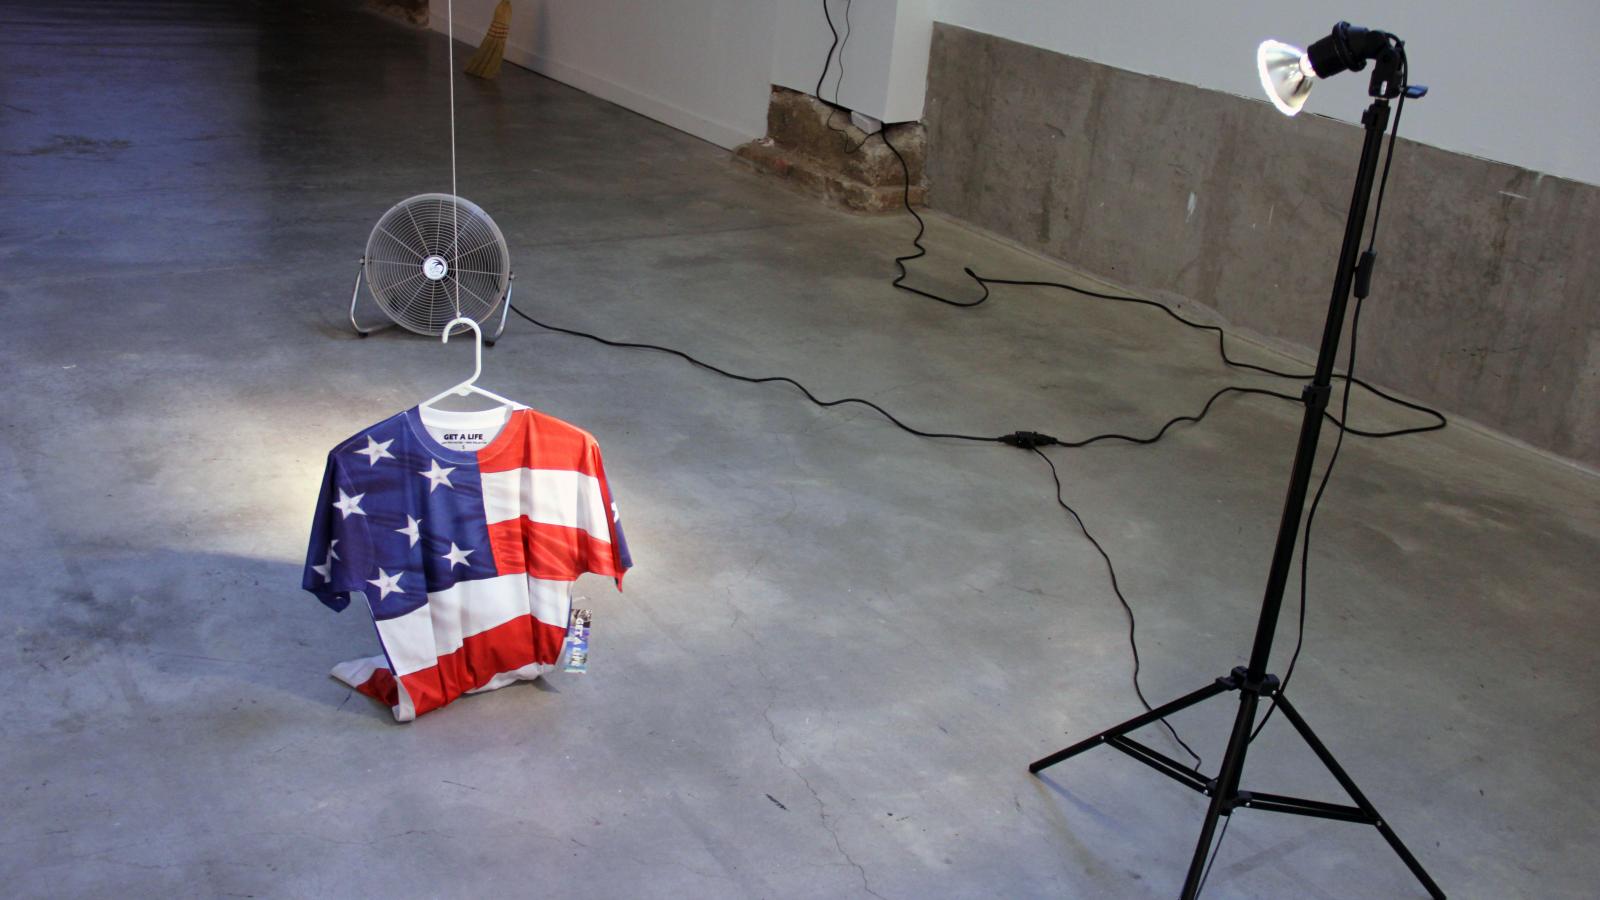 Image of Andres Felipe Castelblaco Olaya: "Free (or get a life)," video, monitor, t-shirt, fan, 2013-2014